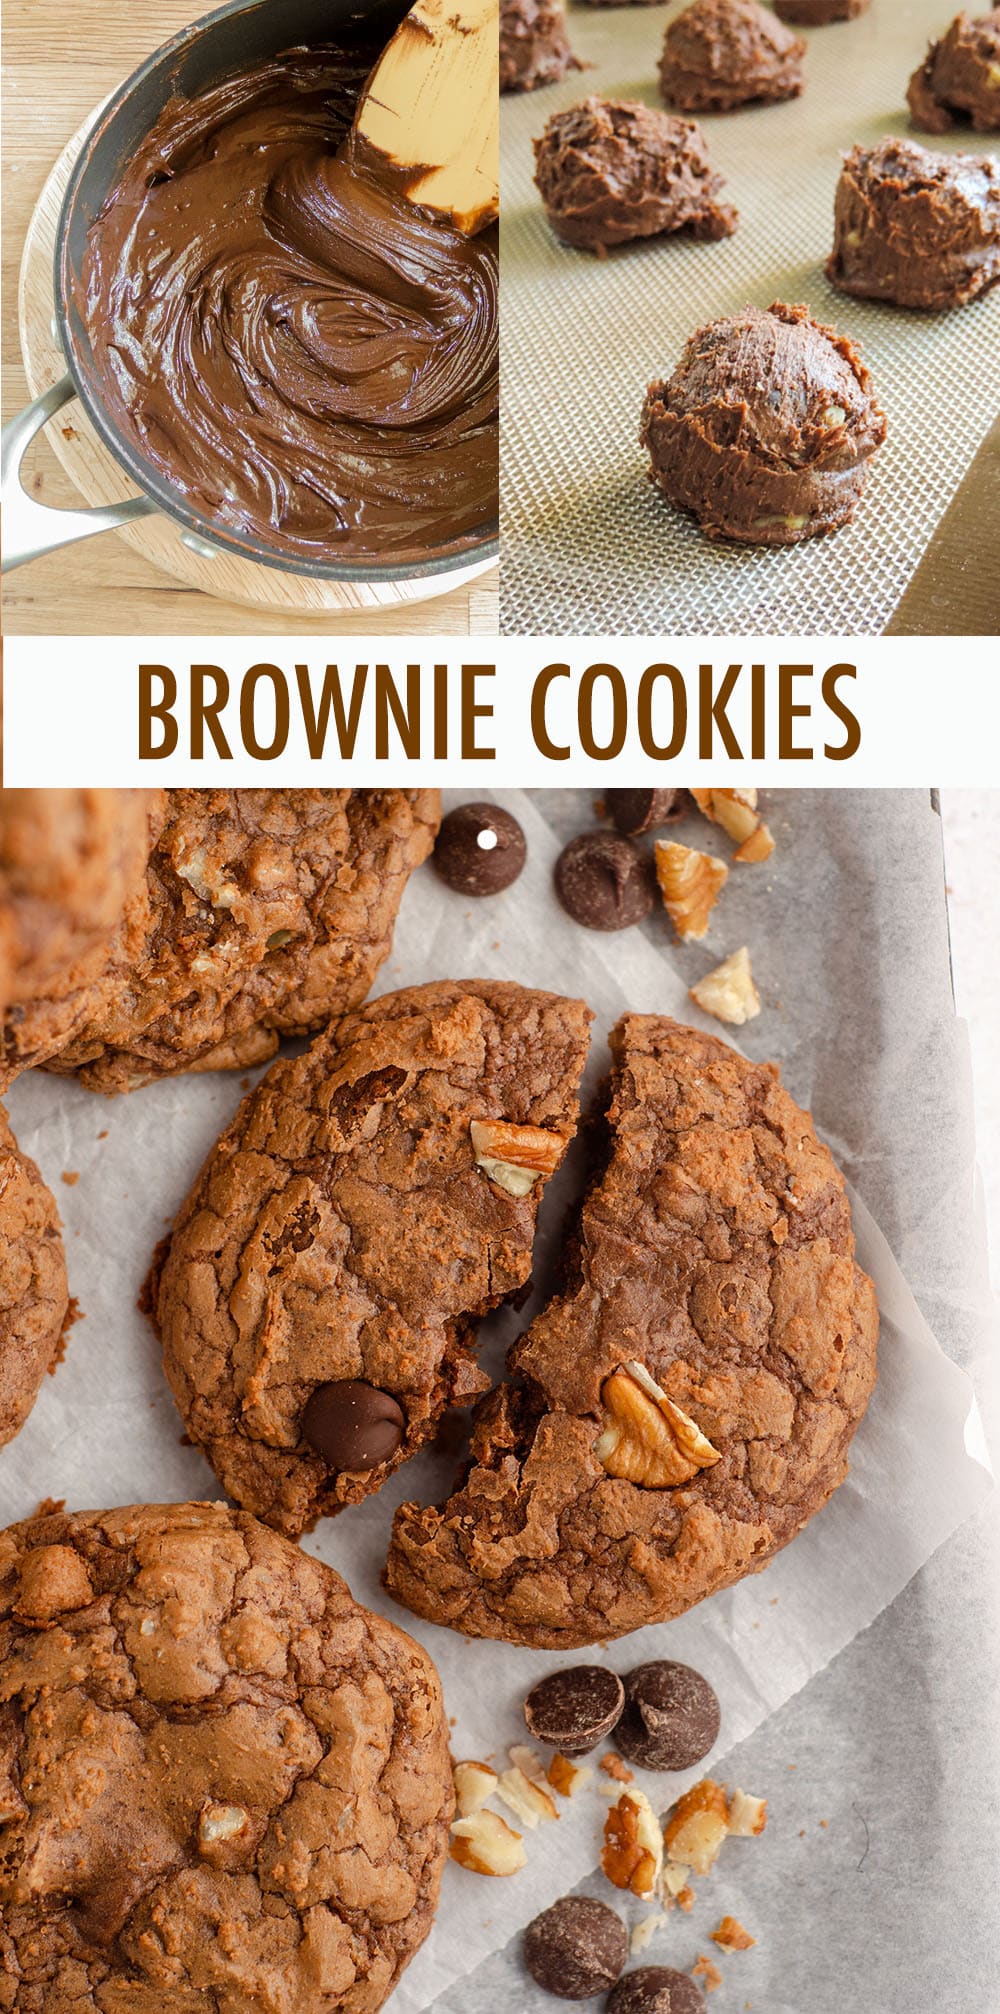 With a gooey center and signature crackly top like a brownie and a crisp exterior like a cookie, this brownie cookie is the best of both dessert worlds! via @frshaprilflours